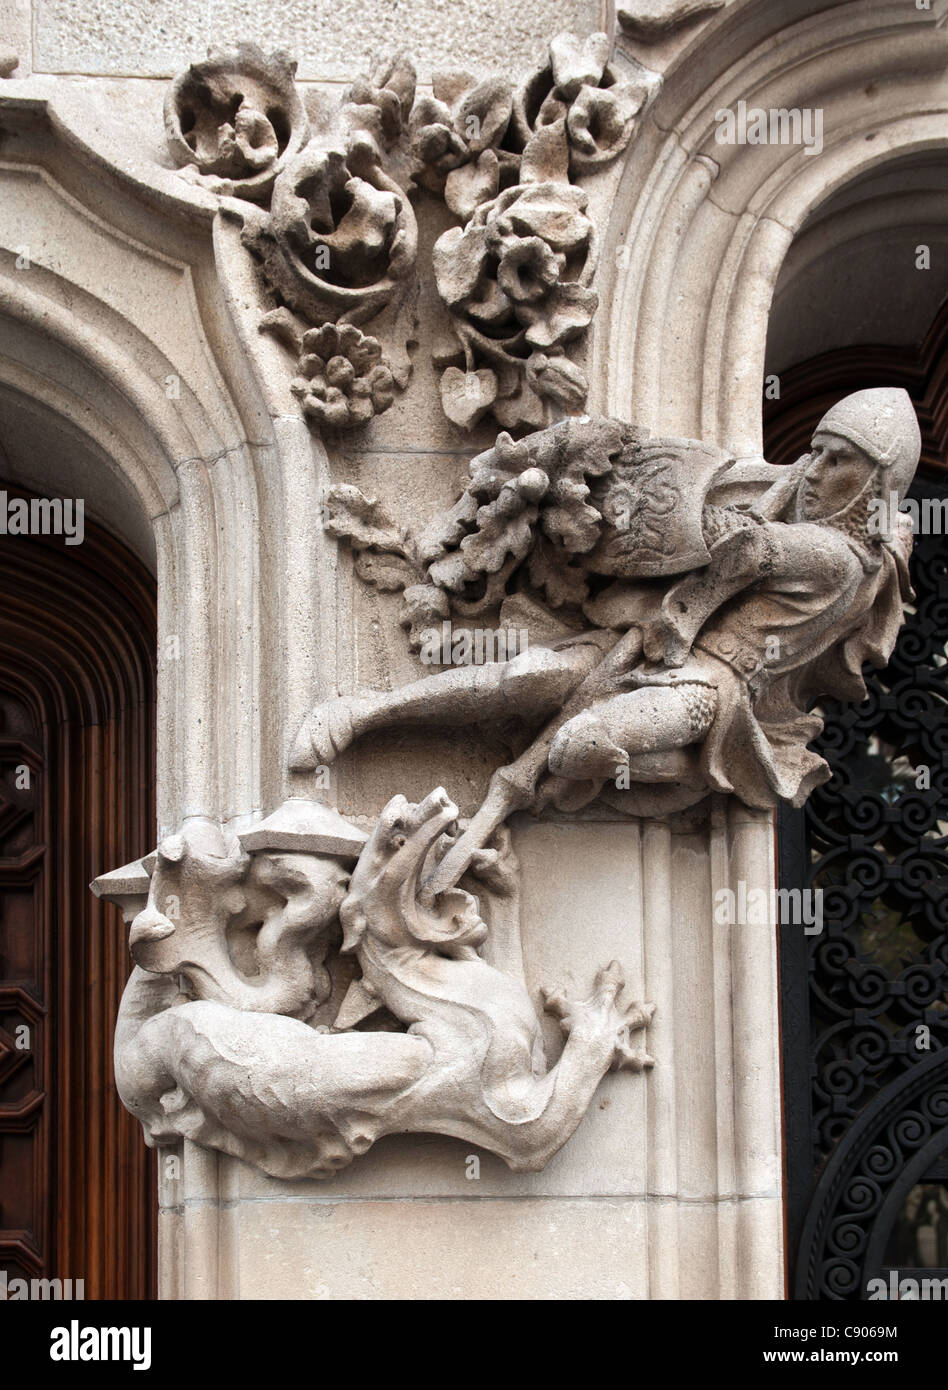 George and the Dragon stone sculpture on building in Barcelona, Spain. Stock Photo